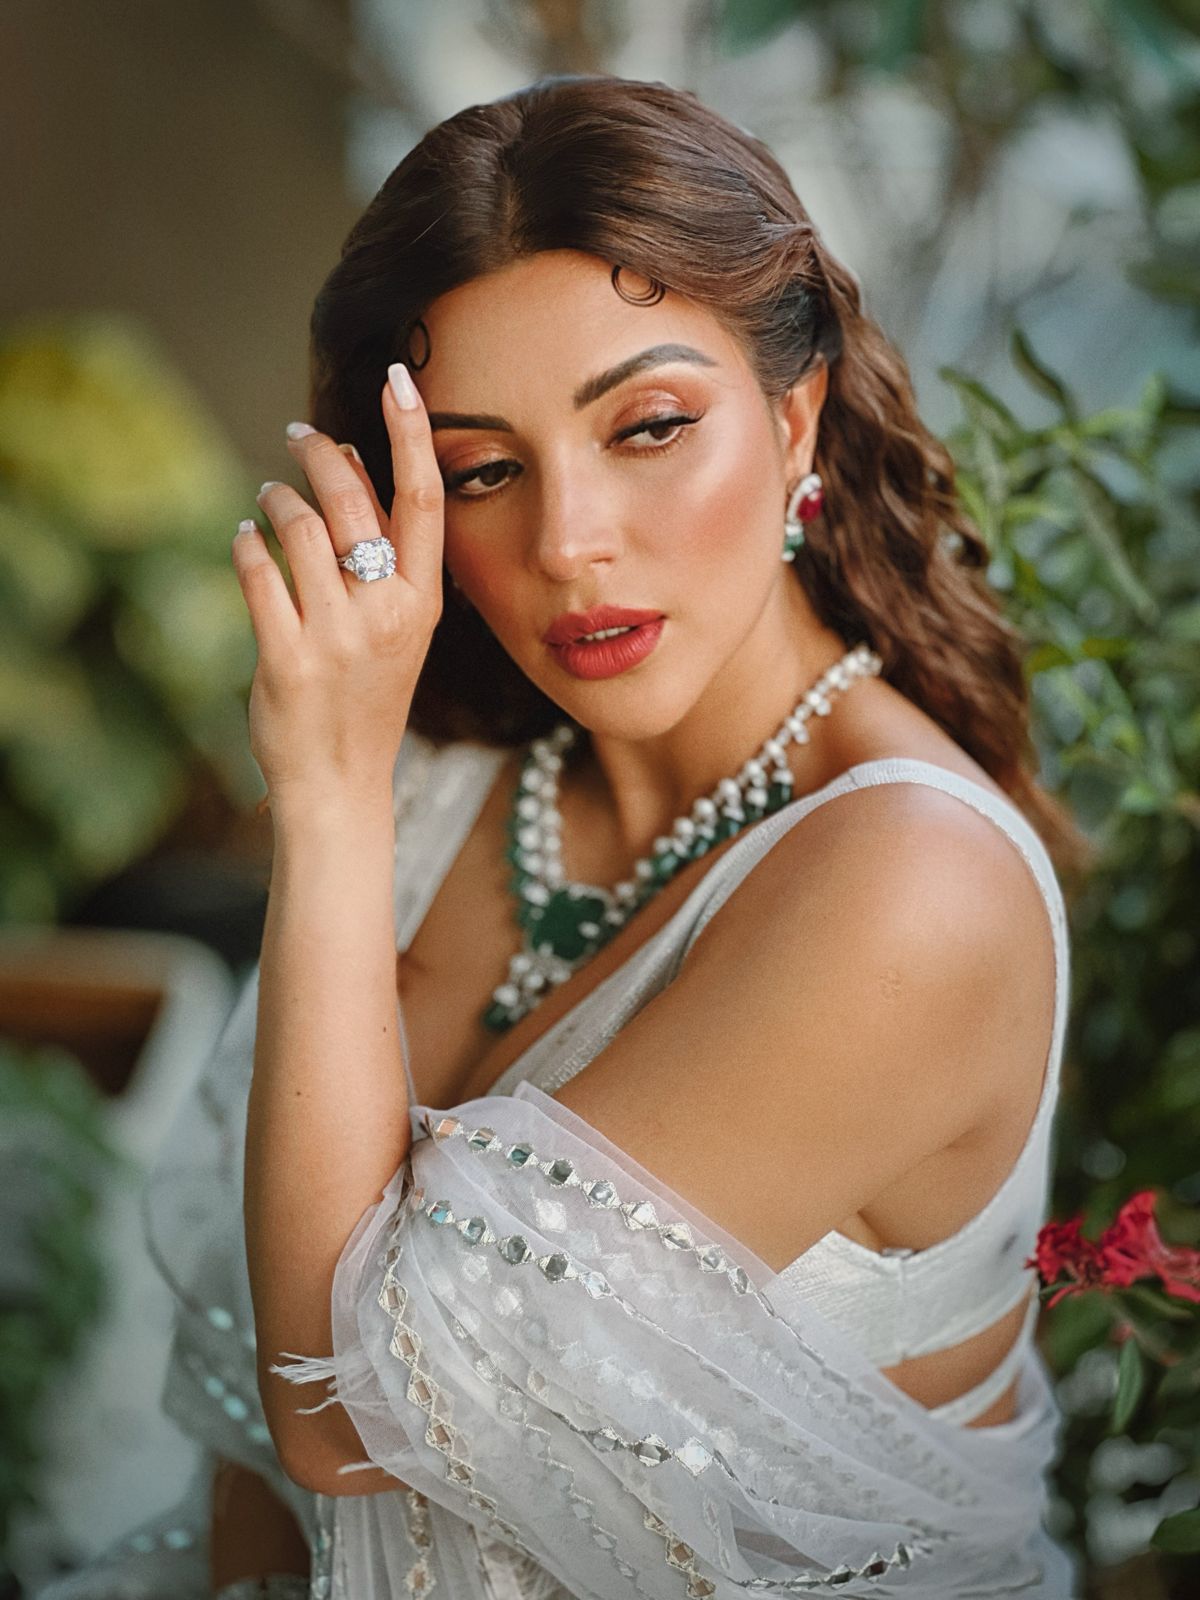 What A Beauty: Shama Sikander is your ultimate queen of hearts, looks alluring in her white ethnicity